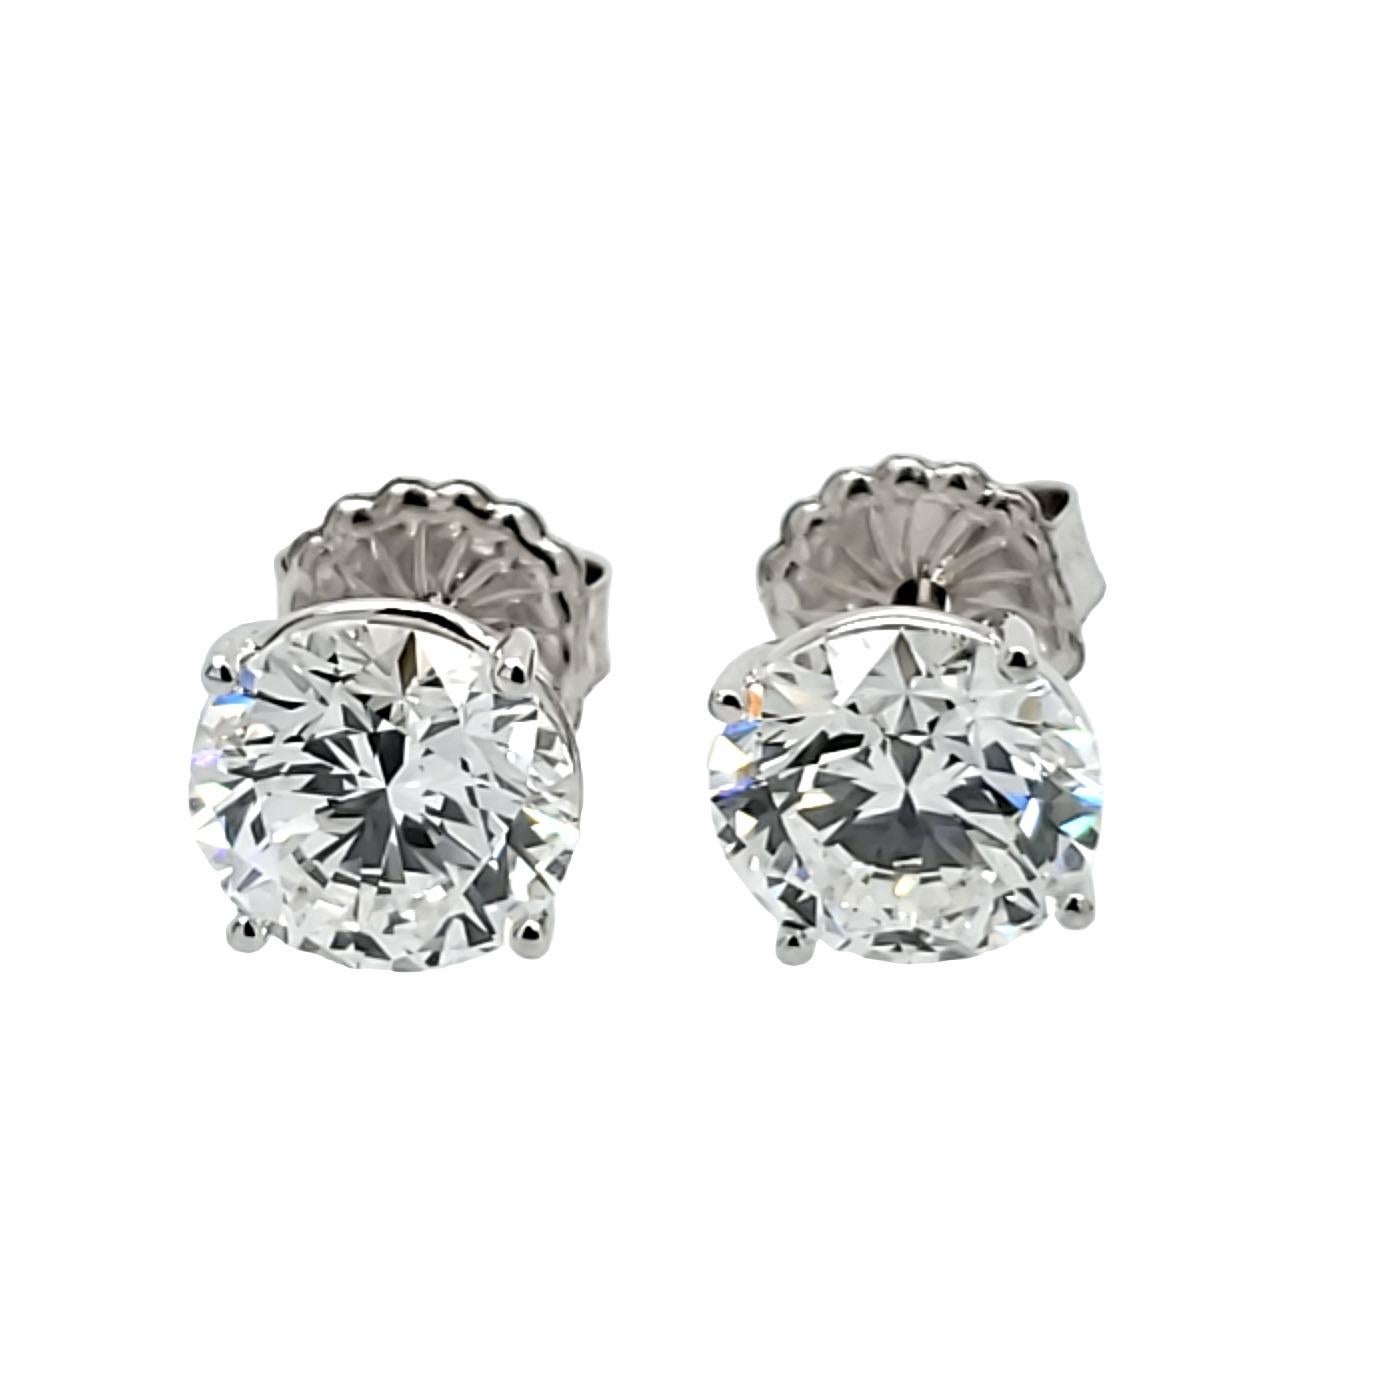 Rosenberg Diamonds & Co. 8.08 total carat weight F color VS2 clarity triple excellent GIA Certified is the perfect pair of diamond studs. We have a large selection of GIA Certified studs from 2 carat total weight to 20 carat total weight. 

Love